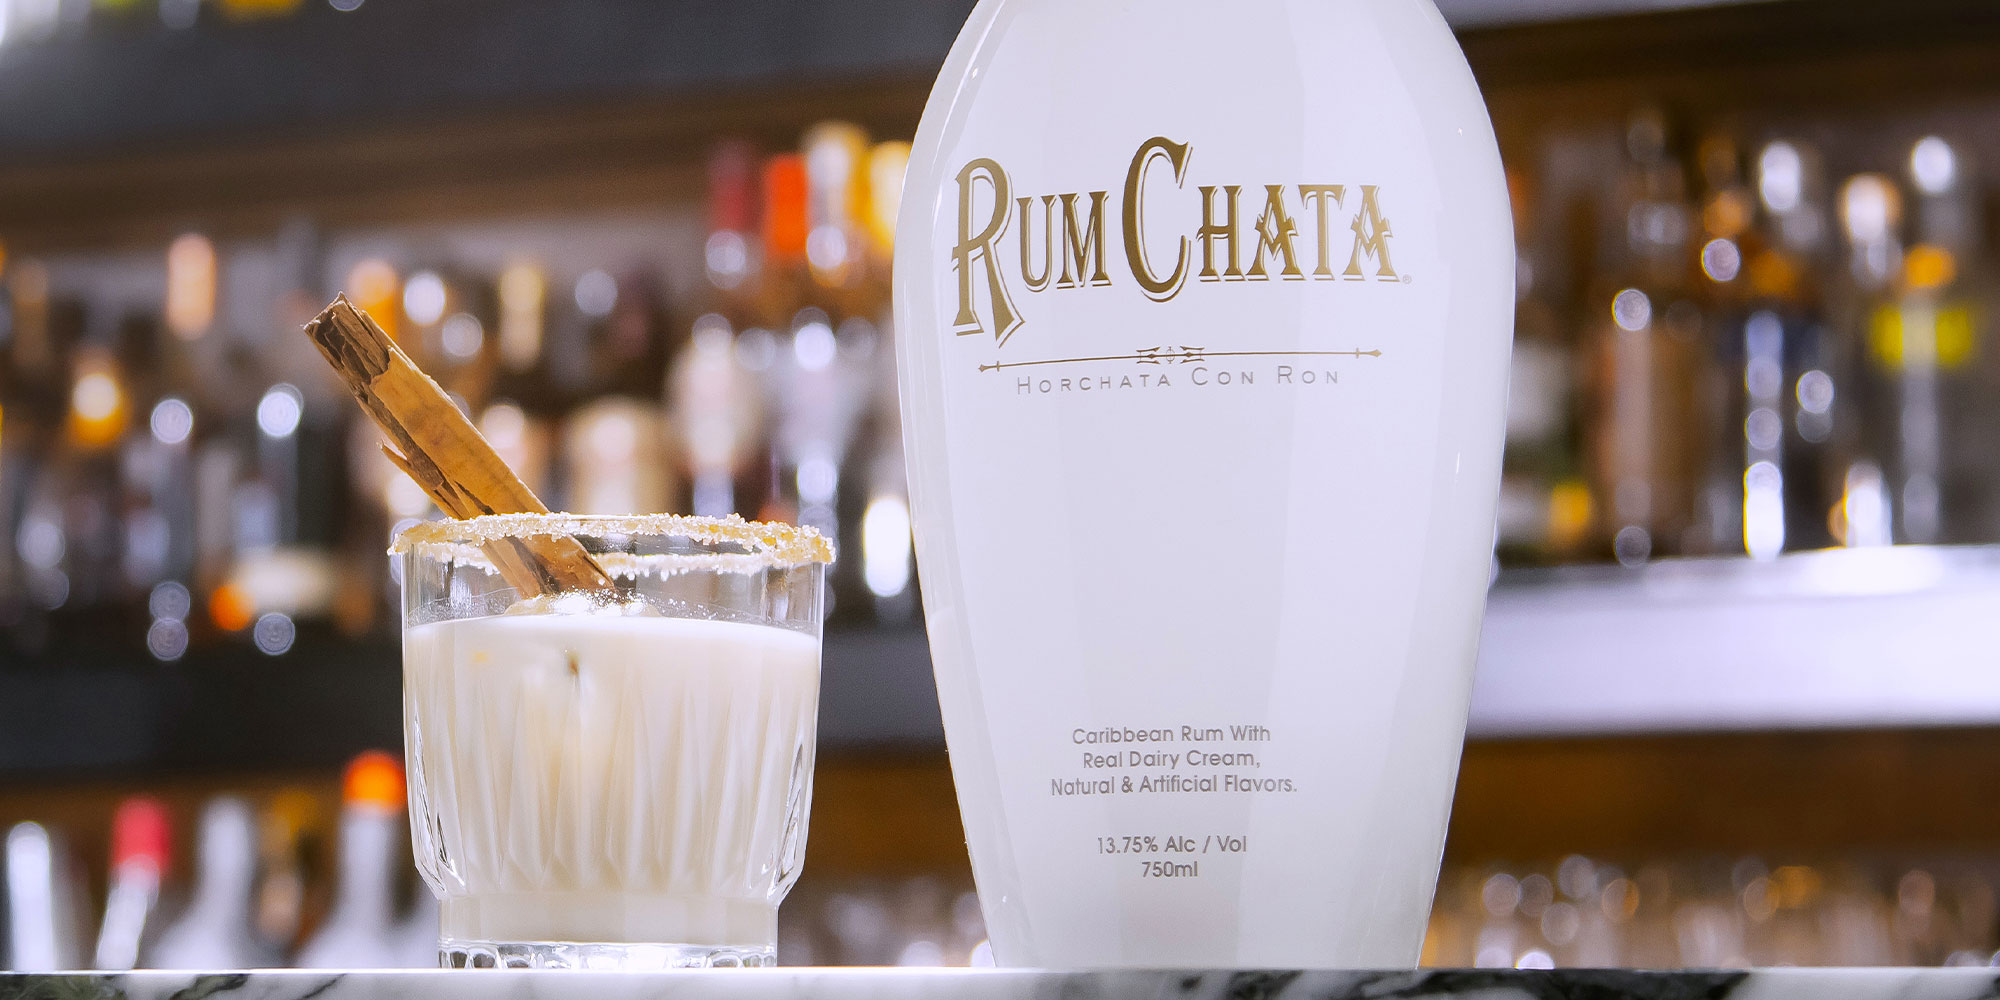 How To Store Rumchata